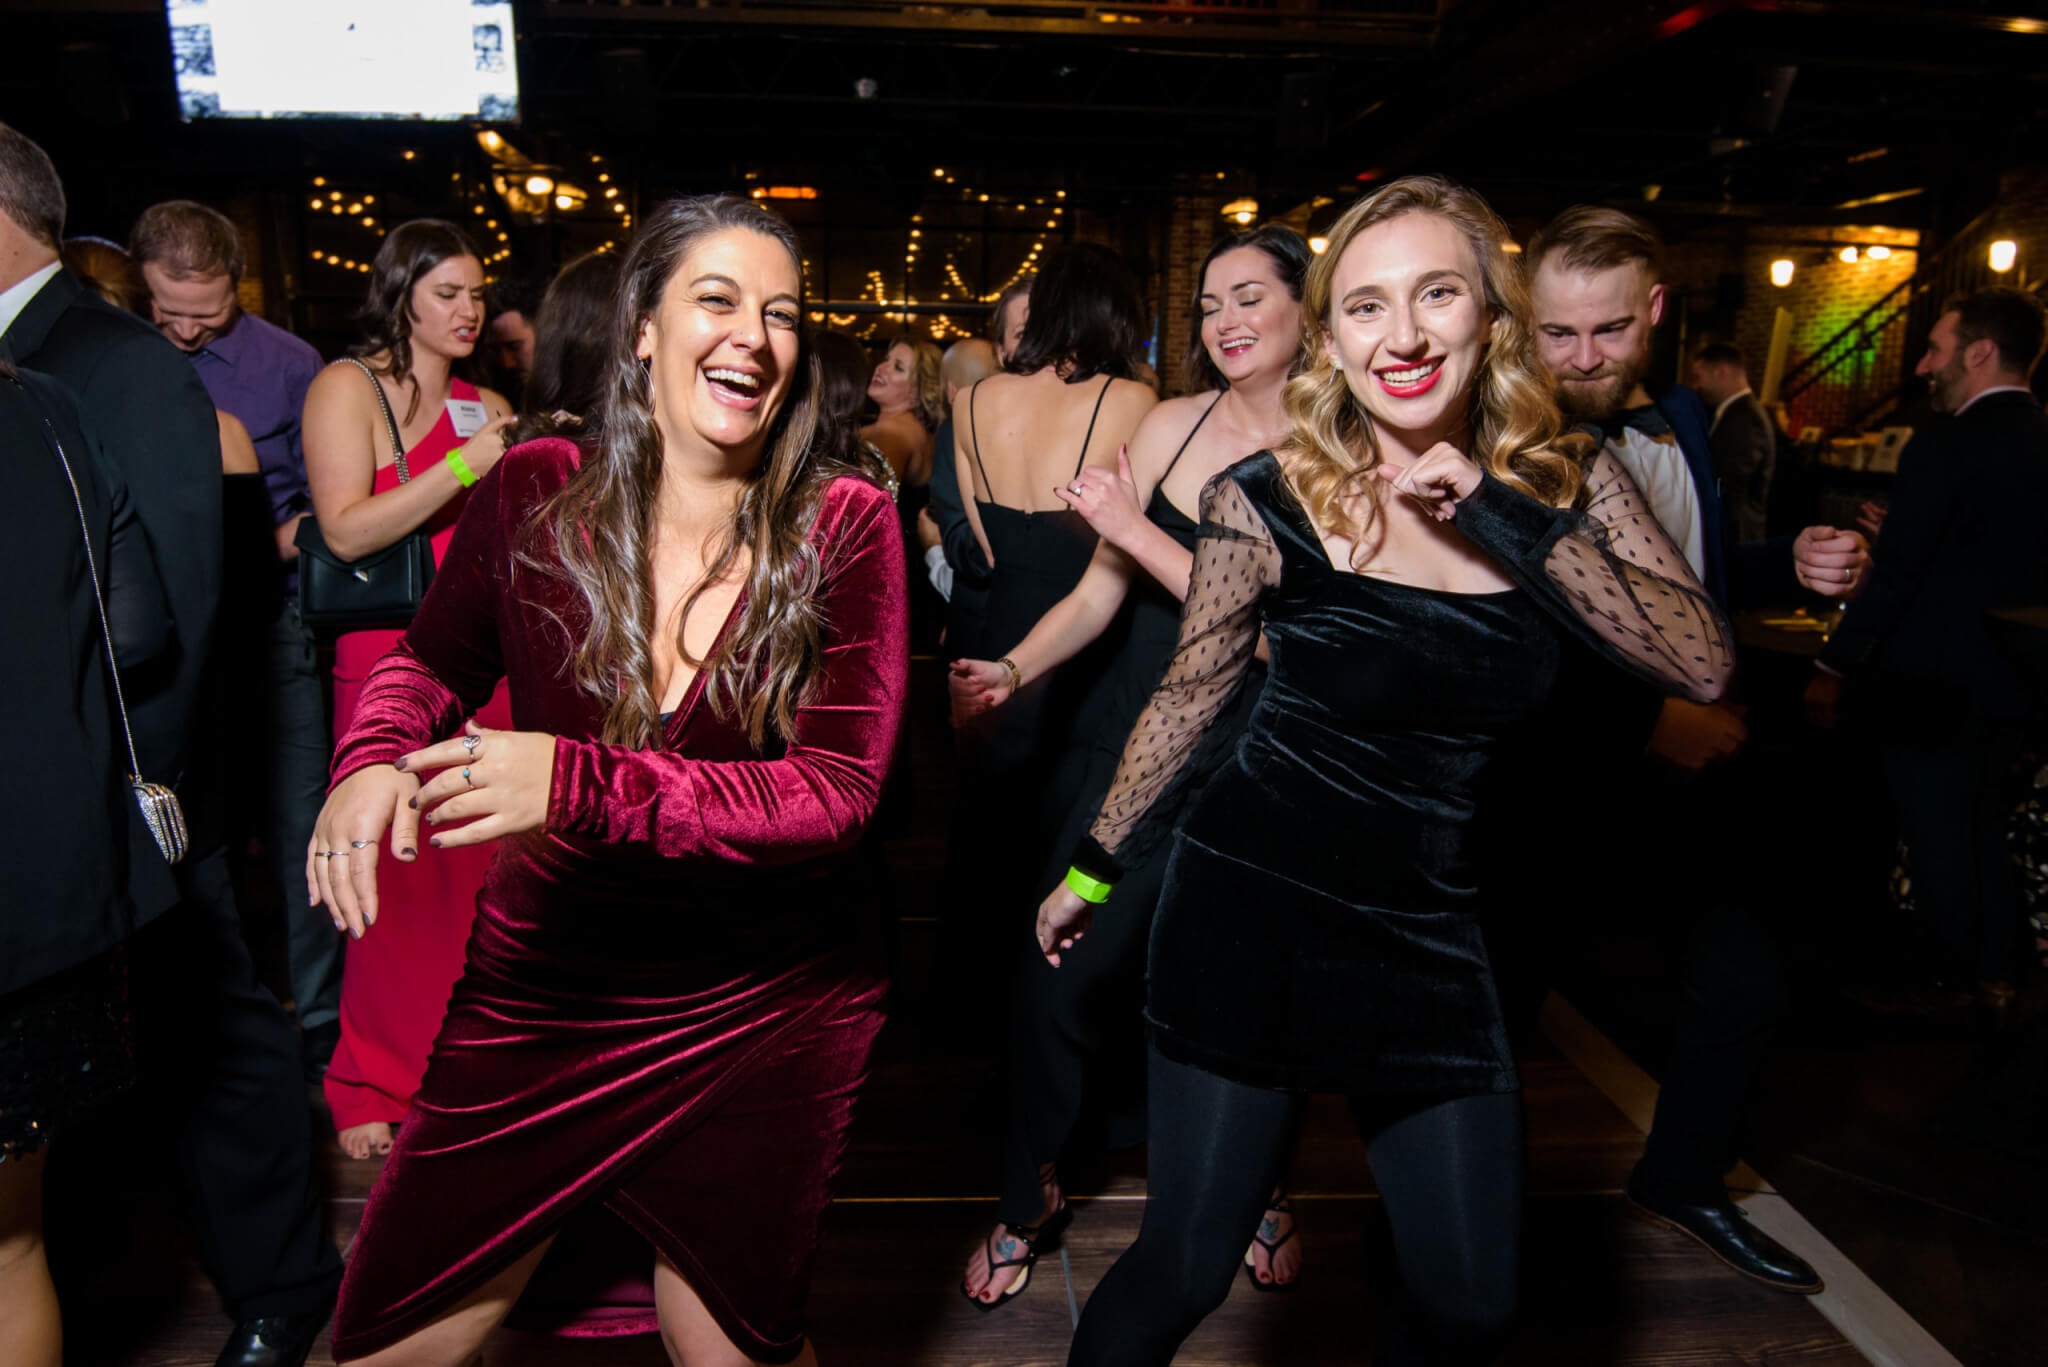 The dancing continues at JEWISHcolorado's Young Adult Division's (YAD) Operation ELEVATE 2022